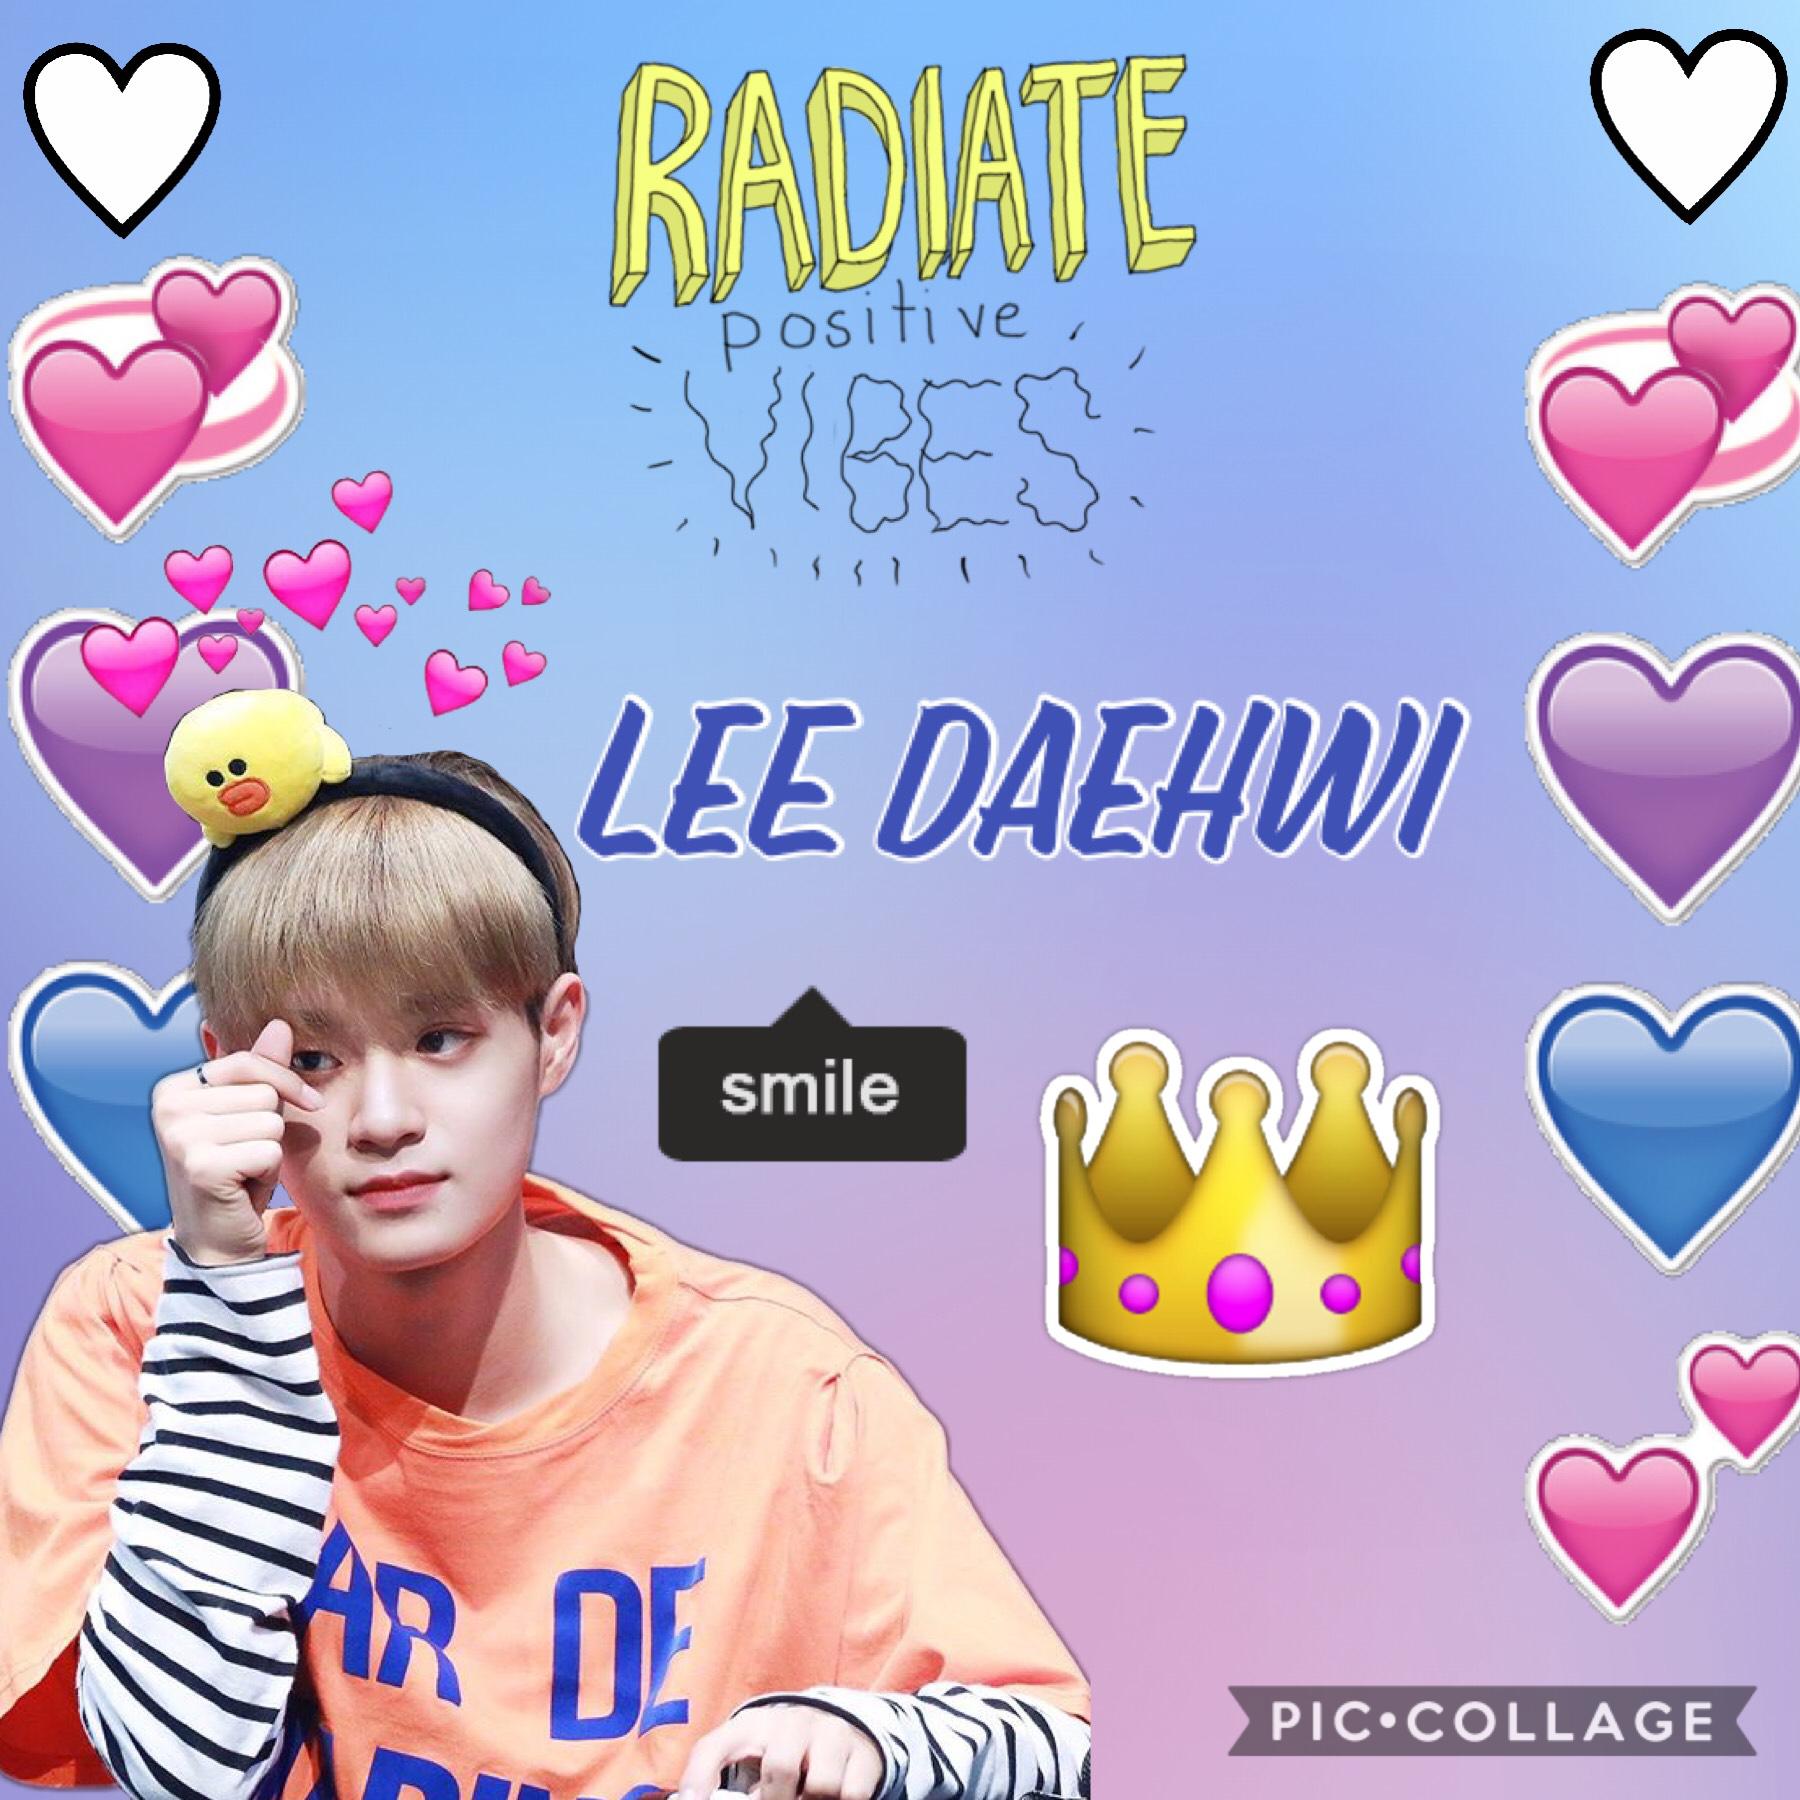 ~❤️~
I can’t believe that Wanna One is disbanding soon😕but they’ve achieved so much and they will hopefully soon Debut with their own companies! Btw Lee Daehwi is the cutest little thing to ever exist